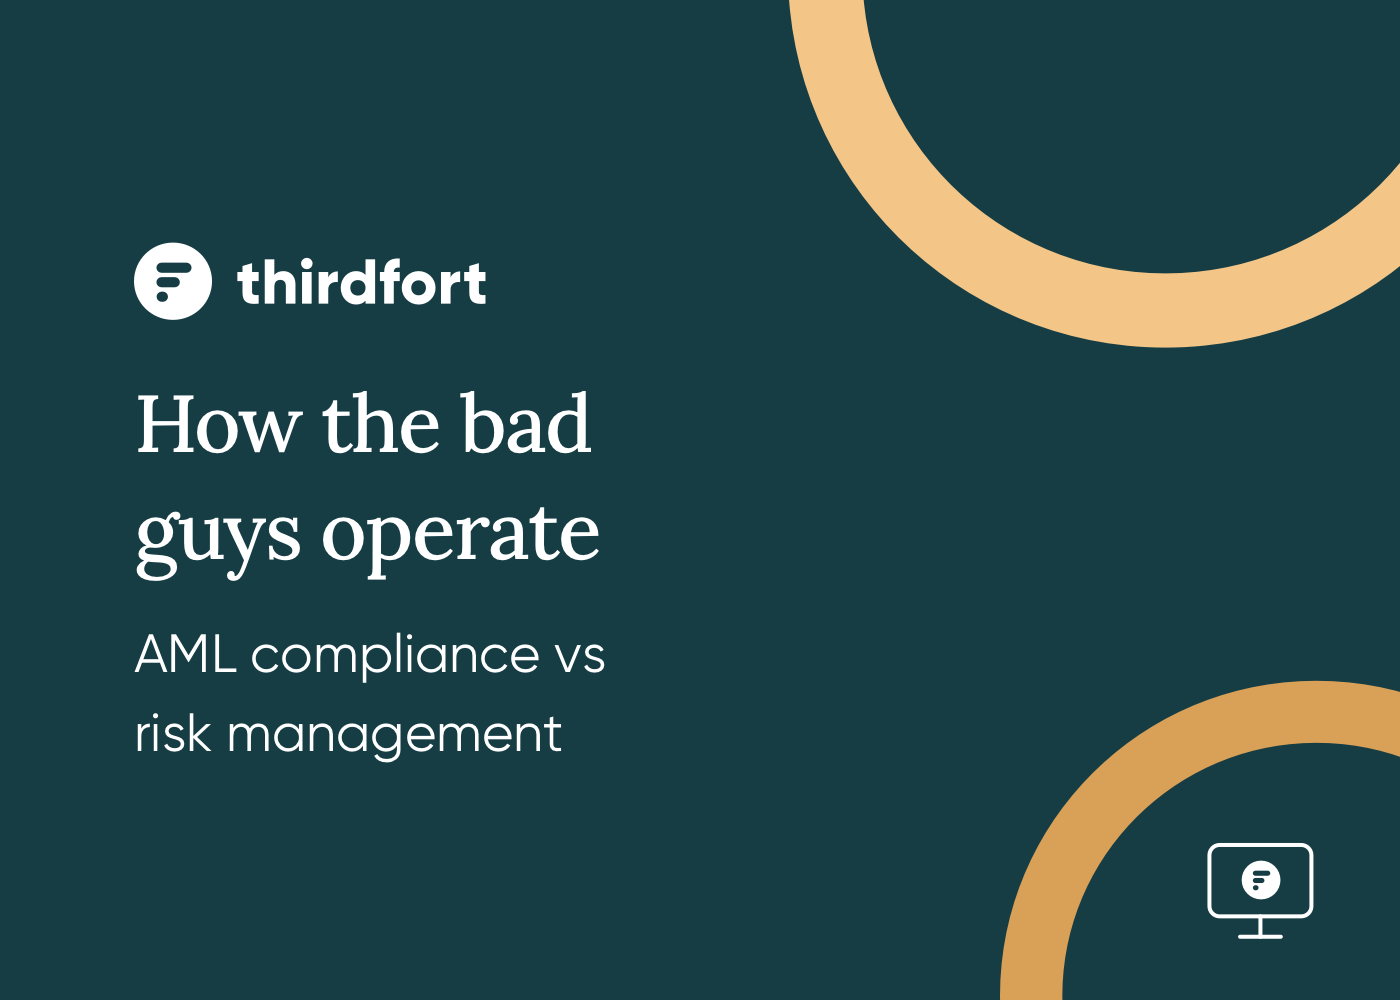 A Thirdfort webinar with title "How the bad guys operate"